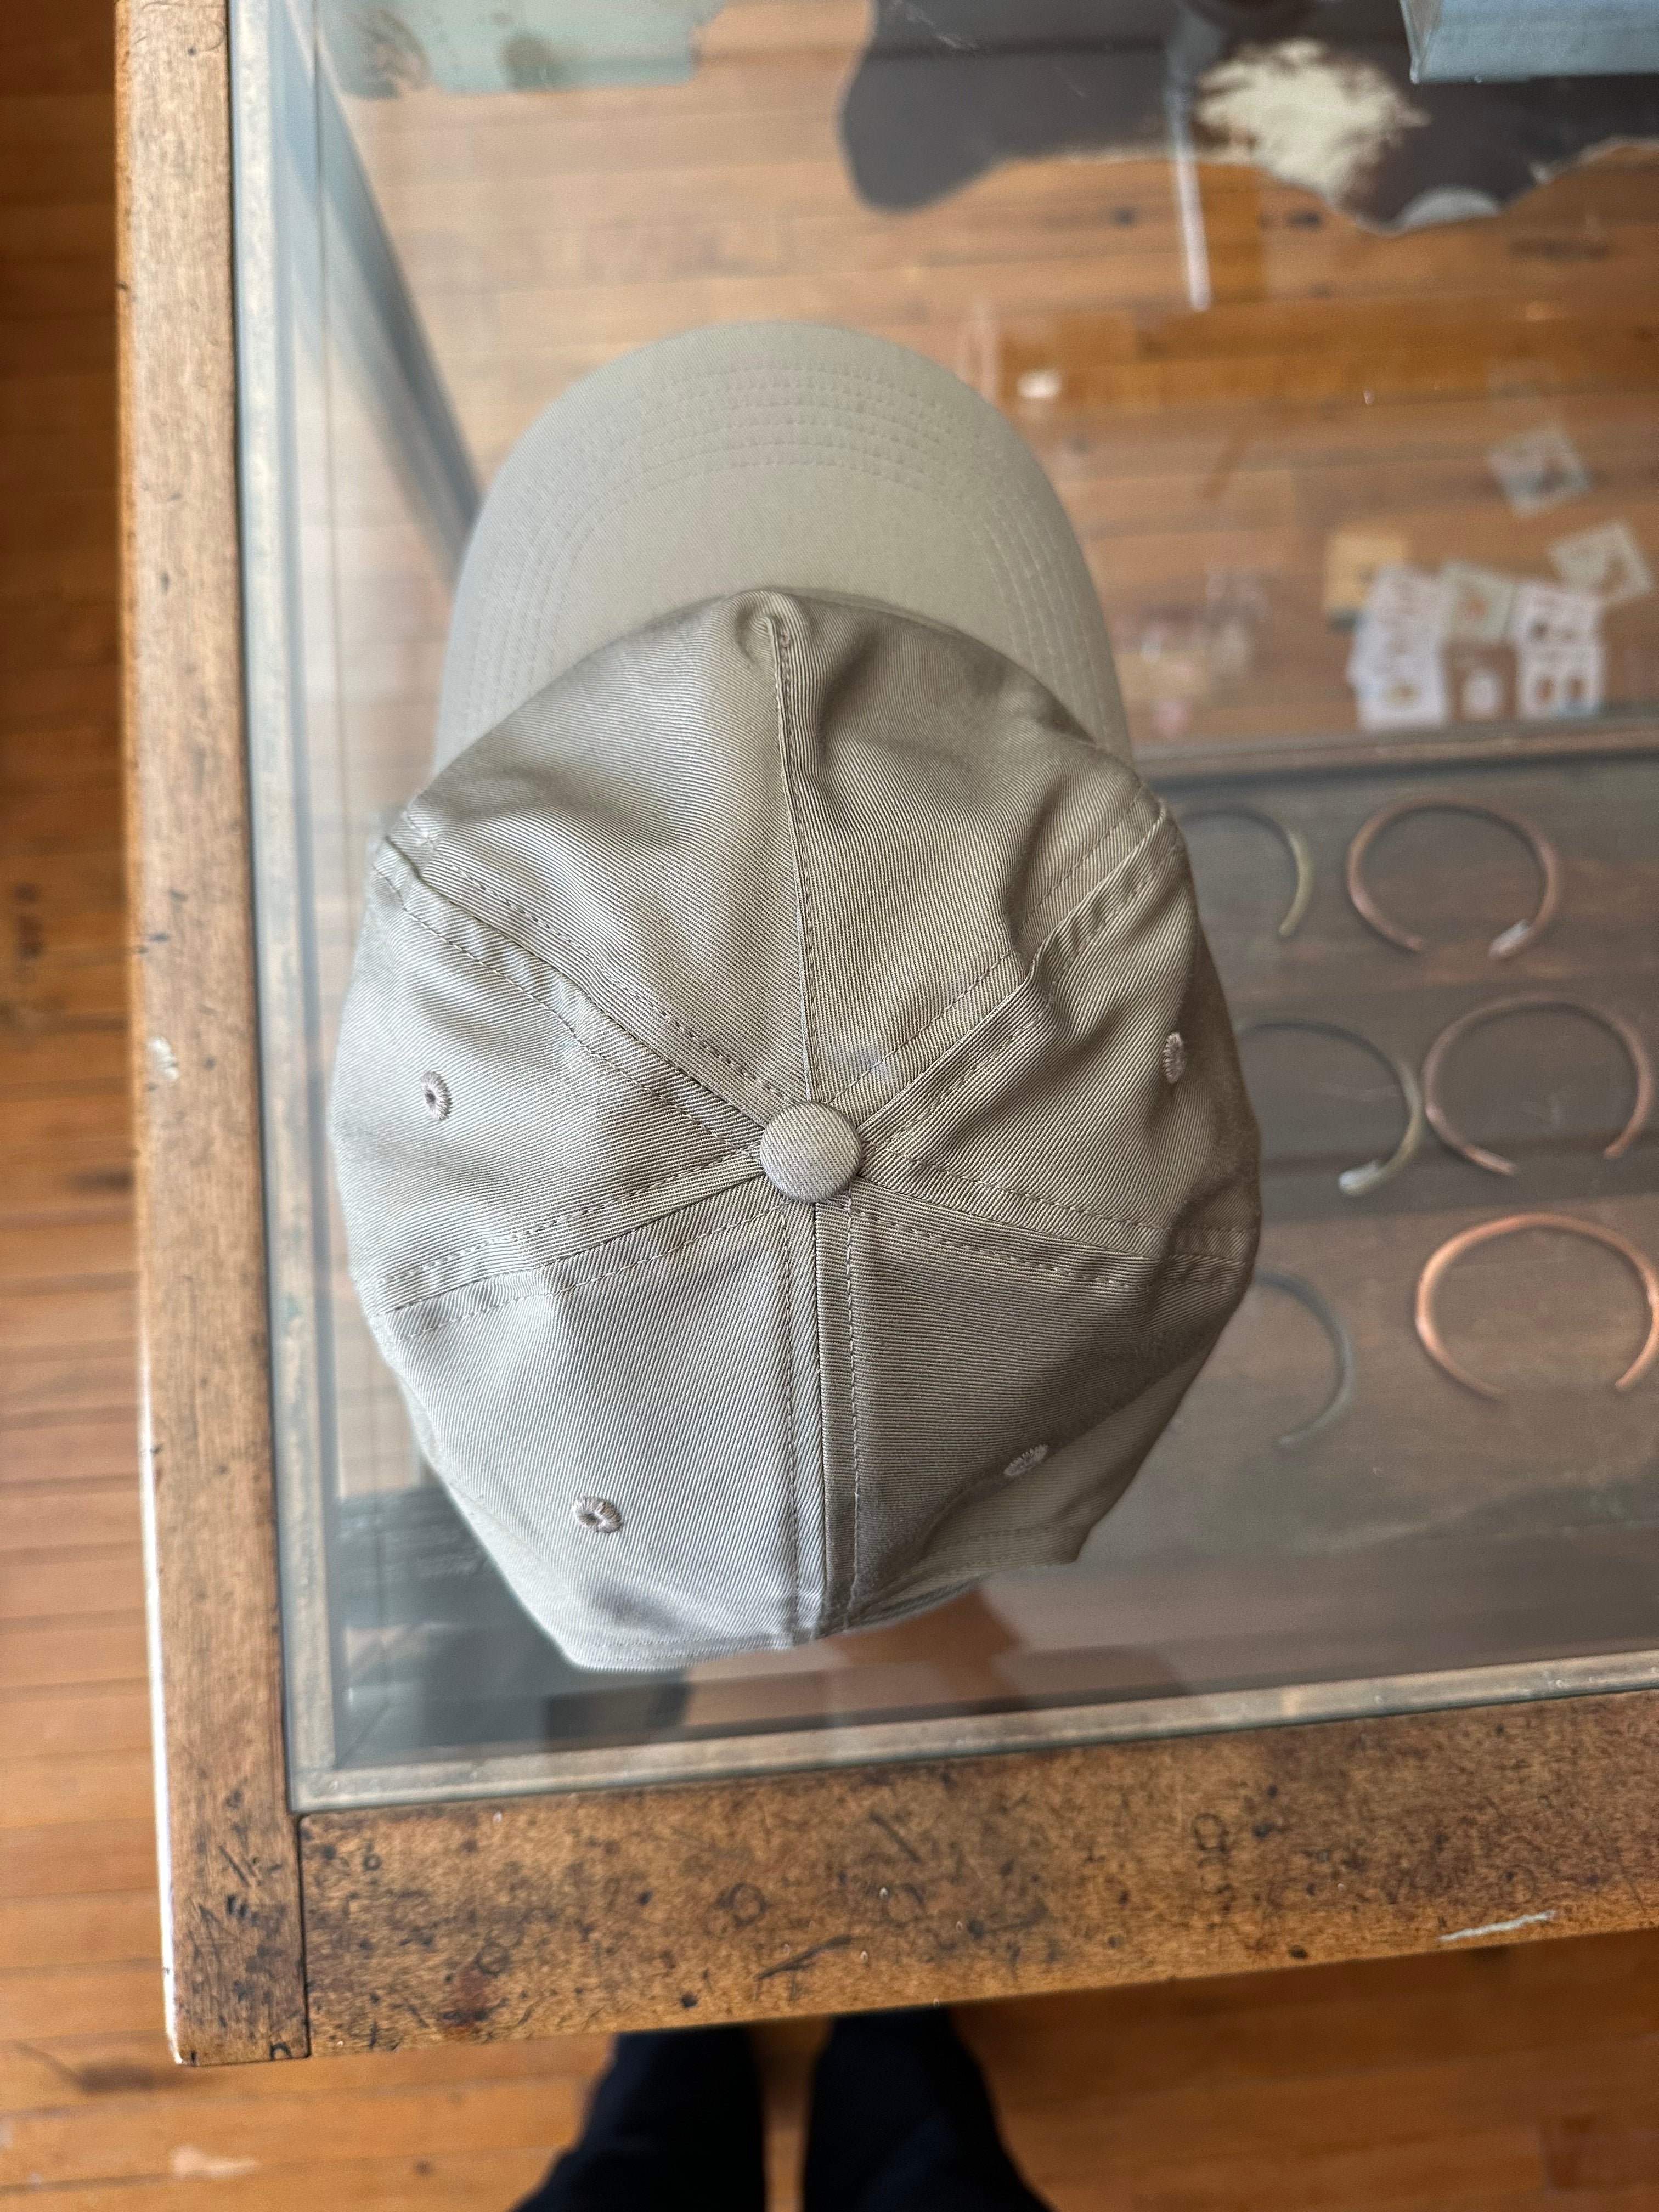 Gently Used Lady White Co. Cotton Twill Cap - Dark Sand